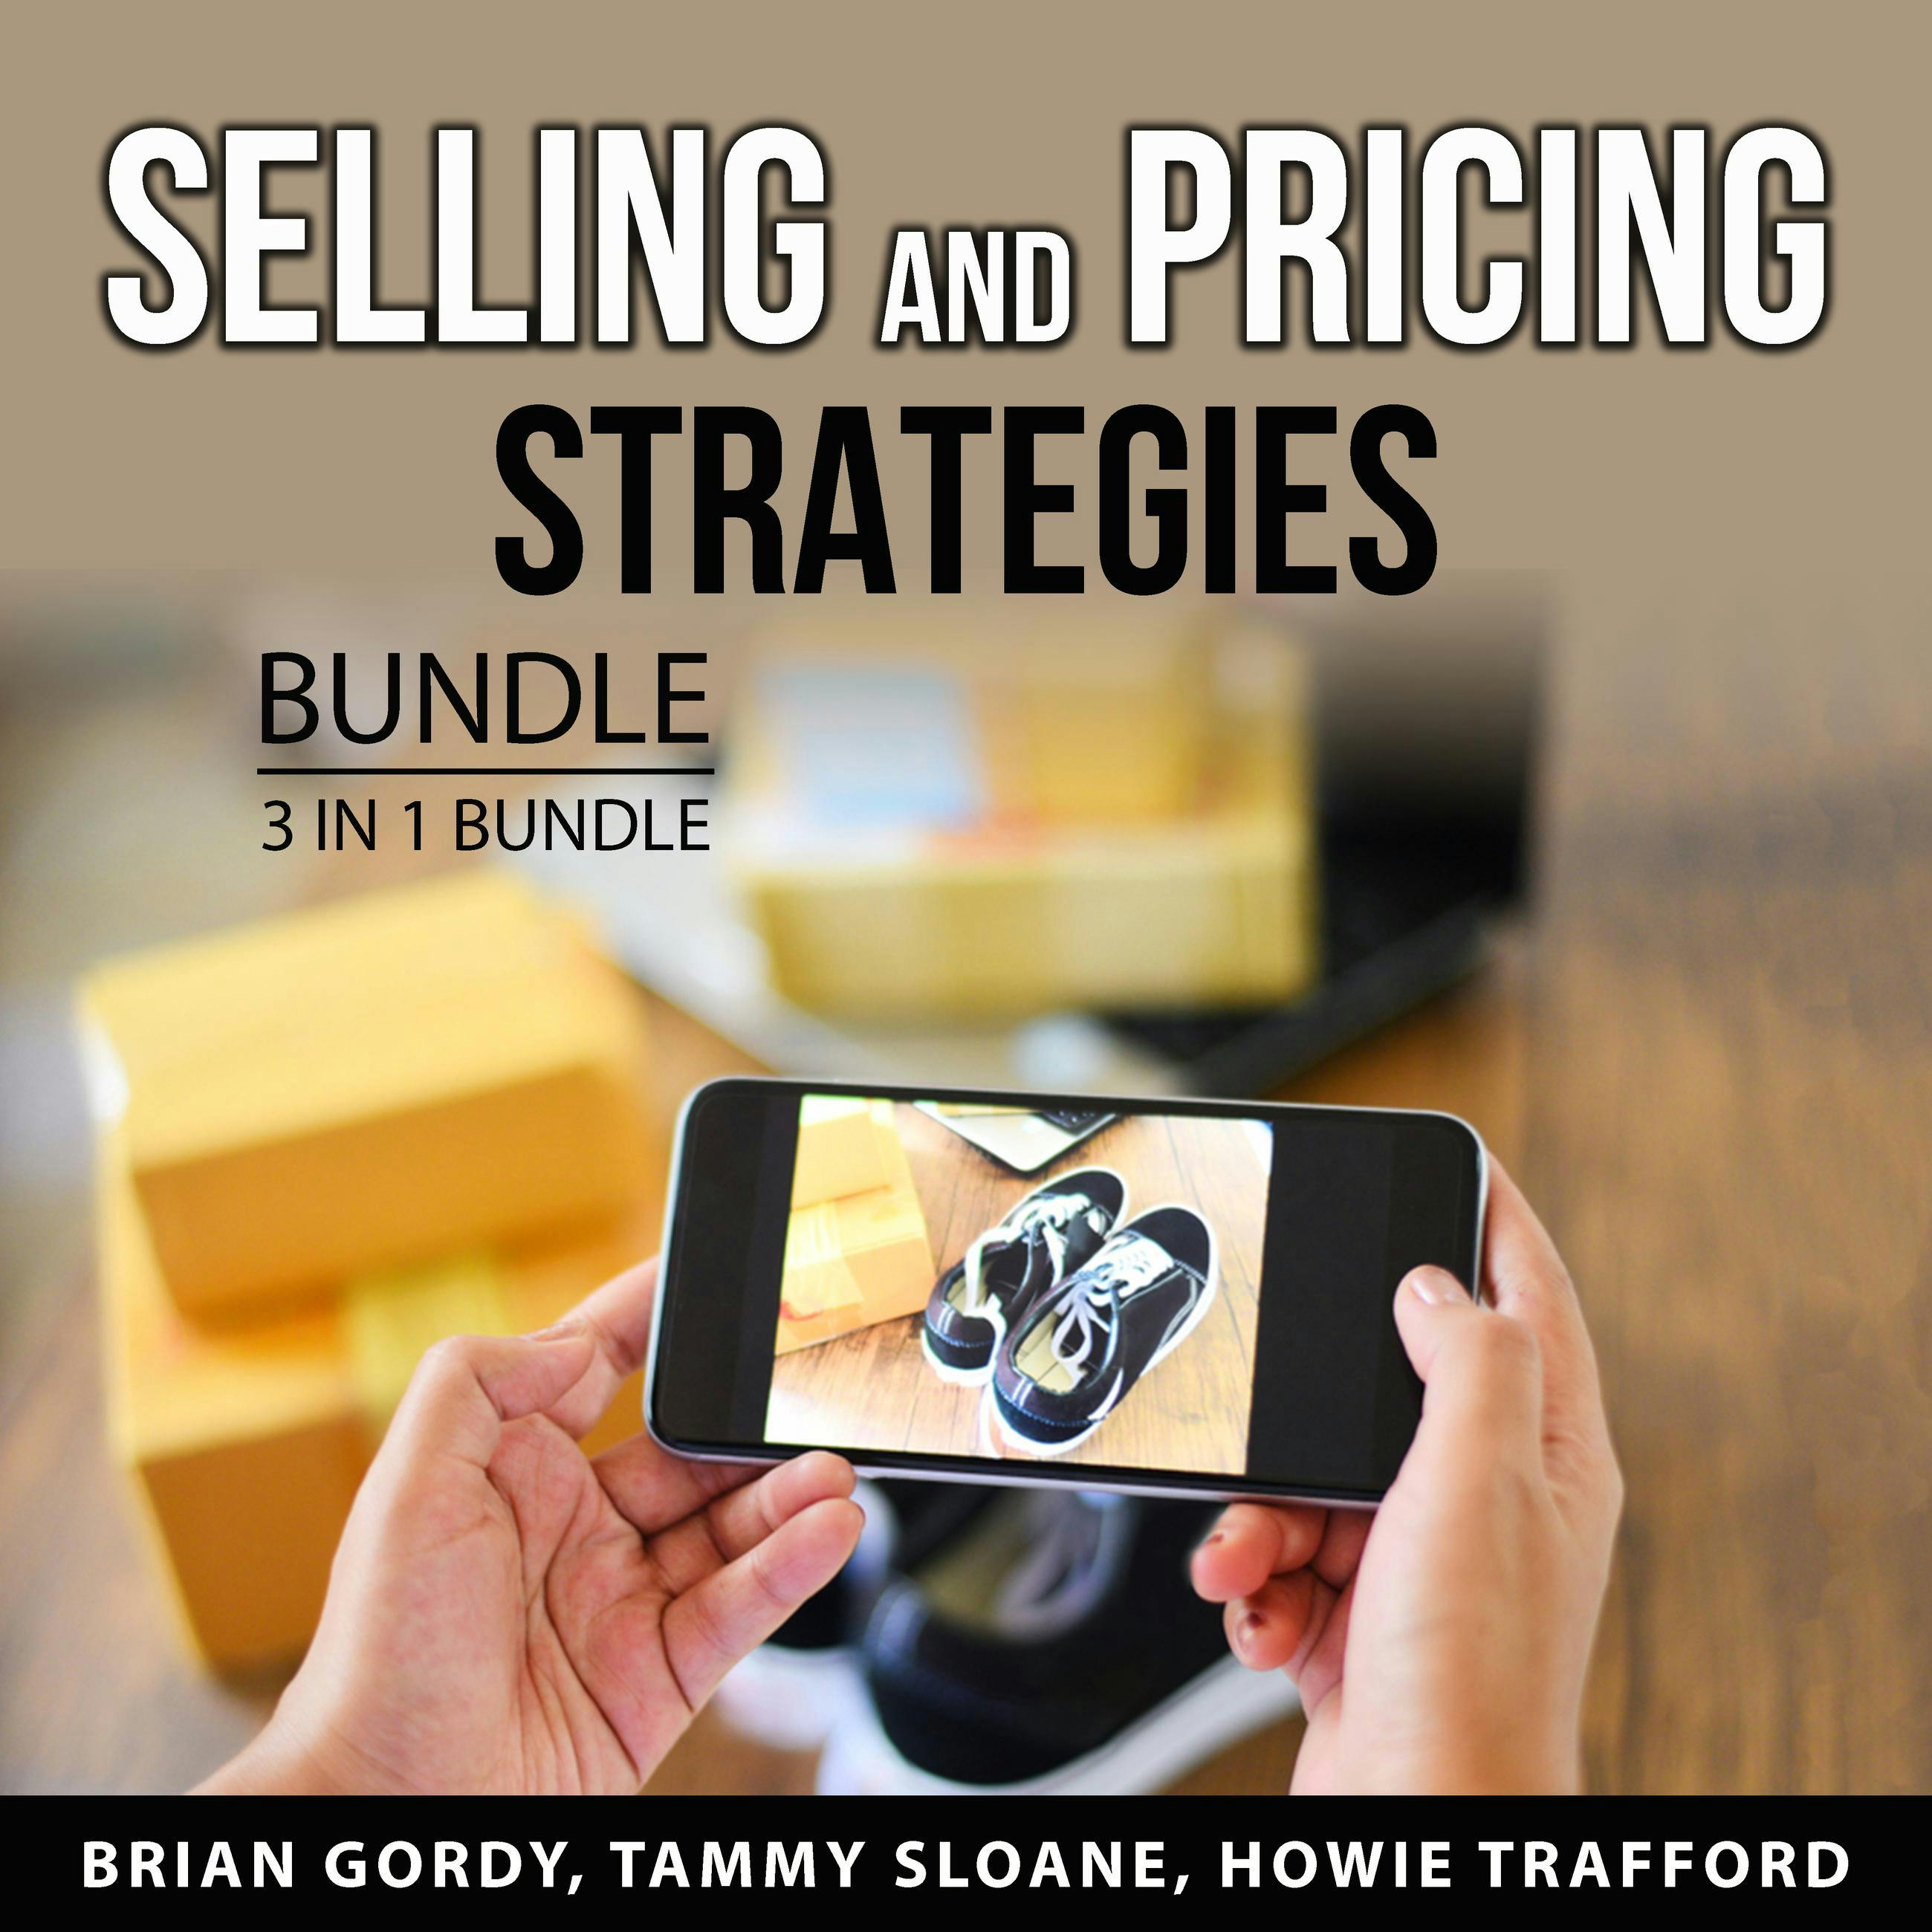 Selling and Pricing Strategies Bundle, 3 in 1 Bundle: Pricing Strategies, Smart Selling Strategies, and How to Create a Bestseller - undefined